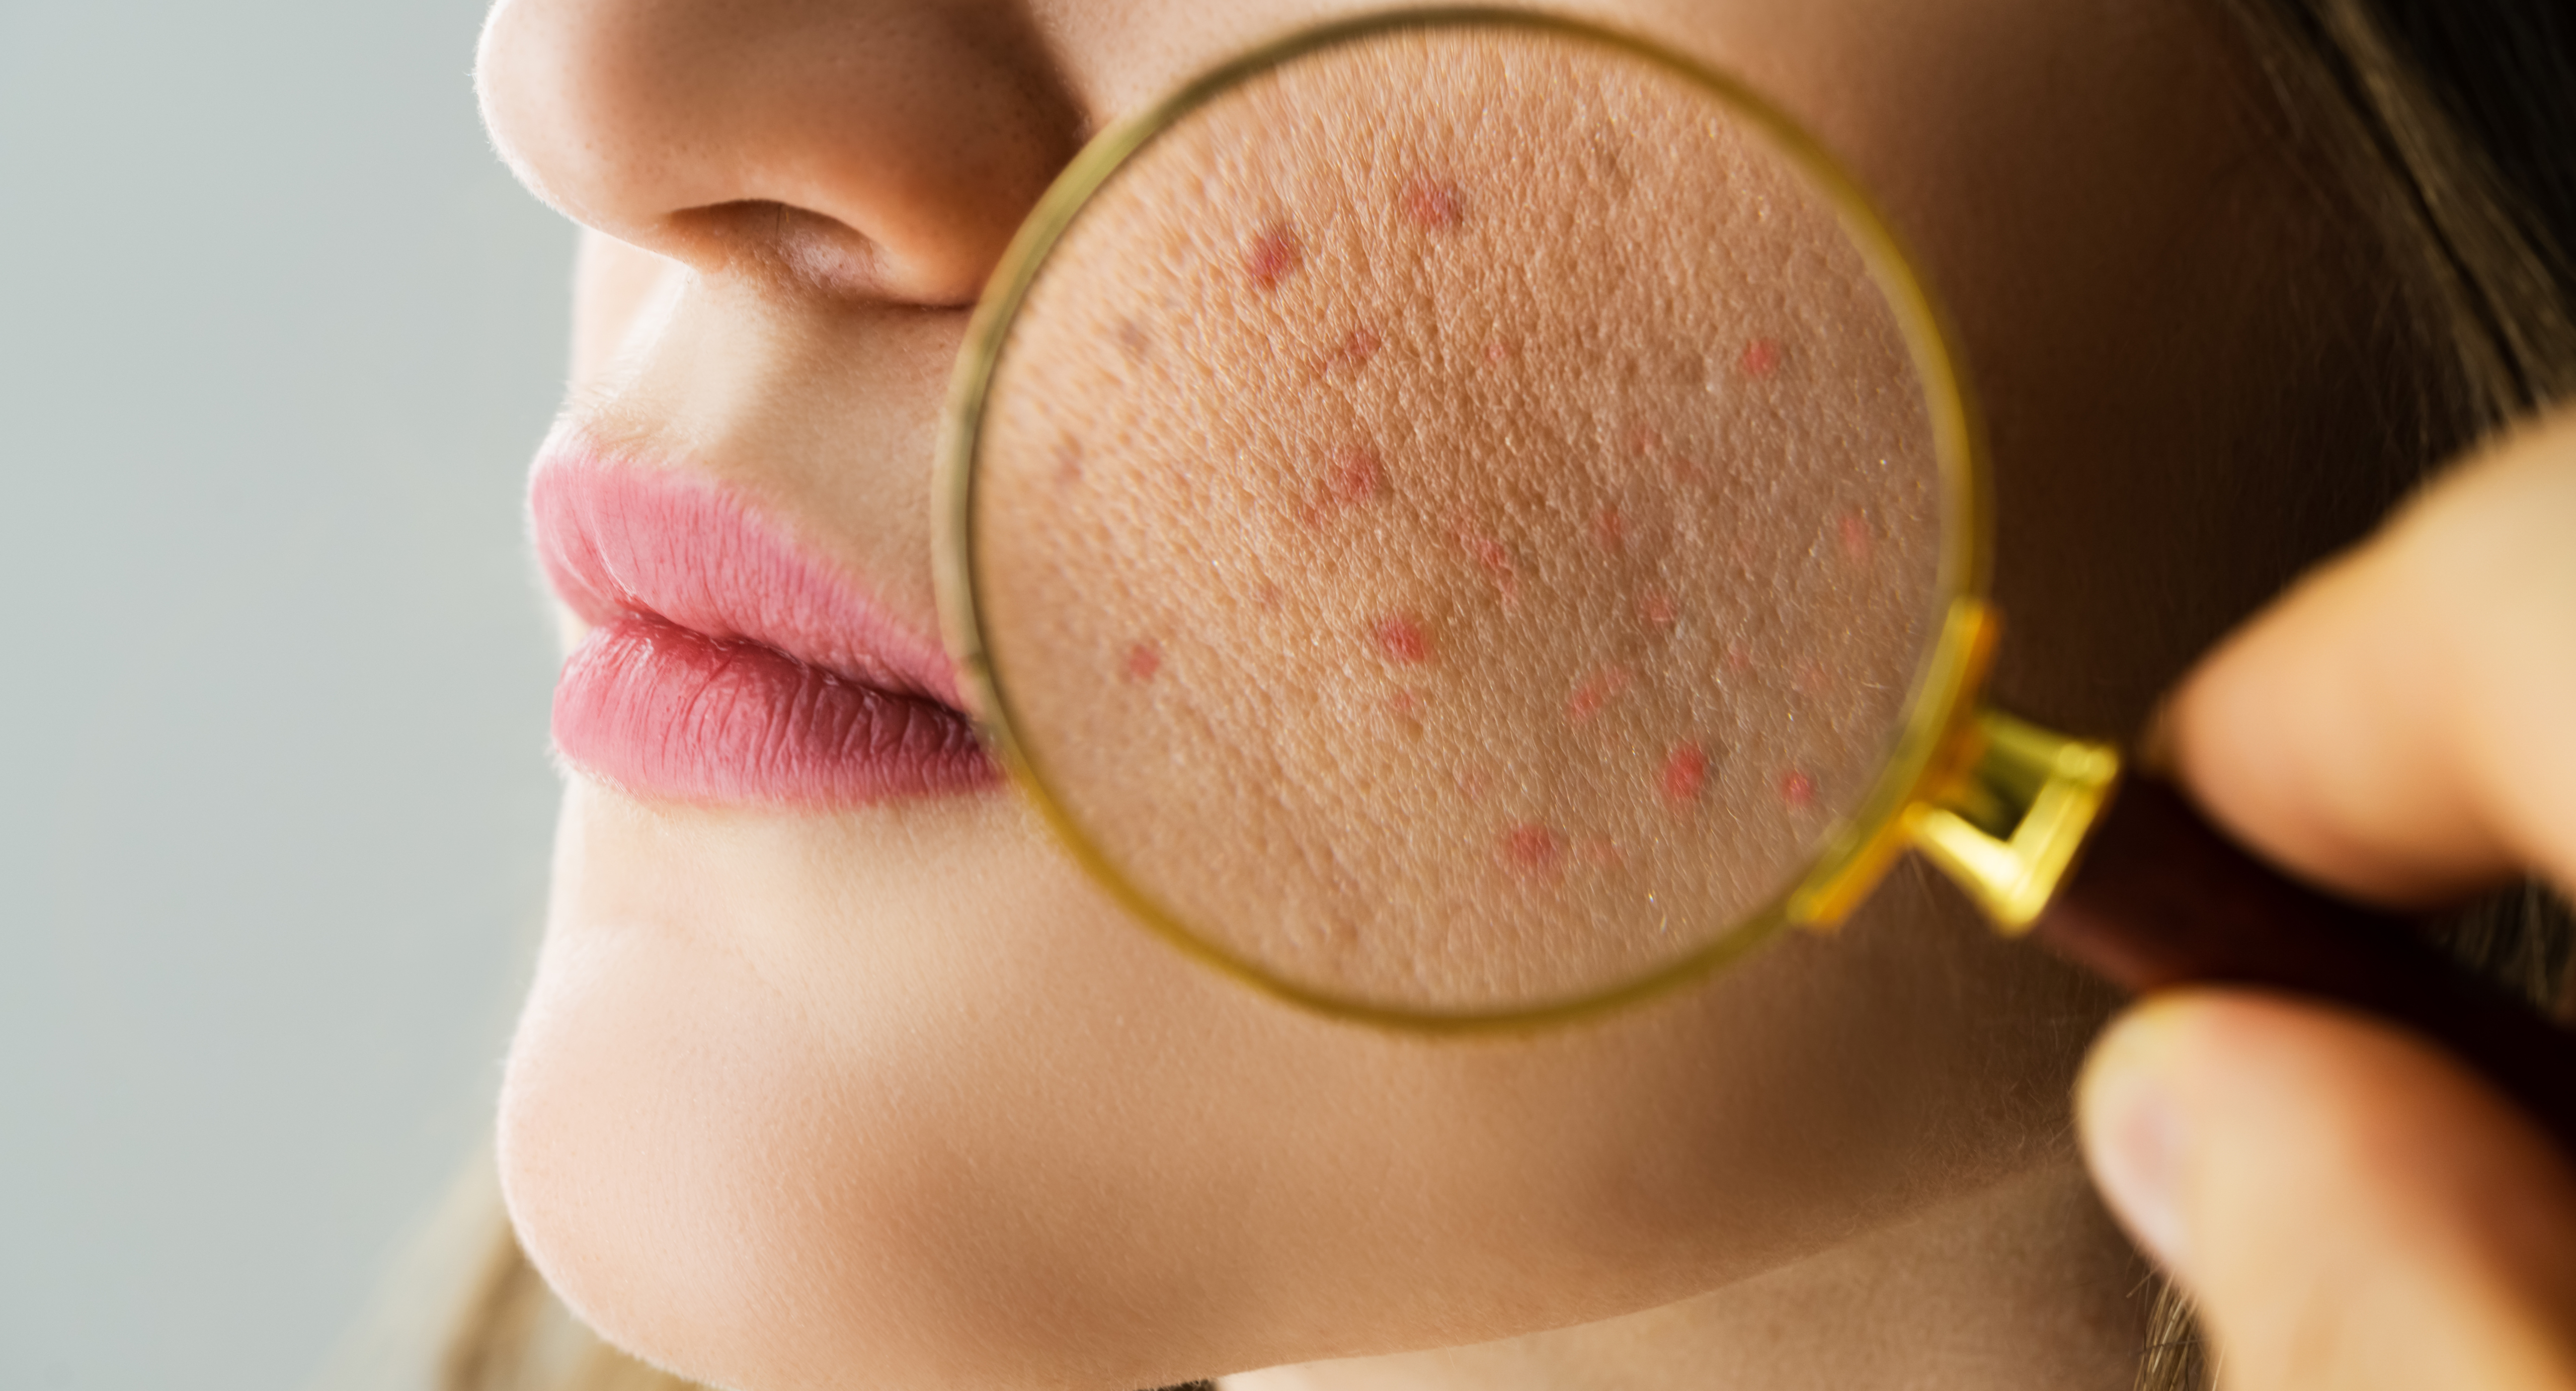 Suffering From Acne Breakouts? Here Are Our Treatment Secrets